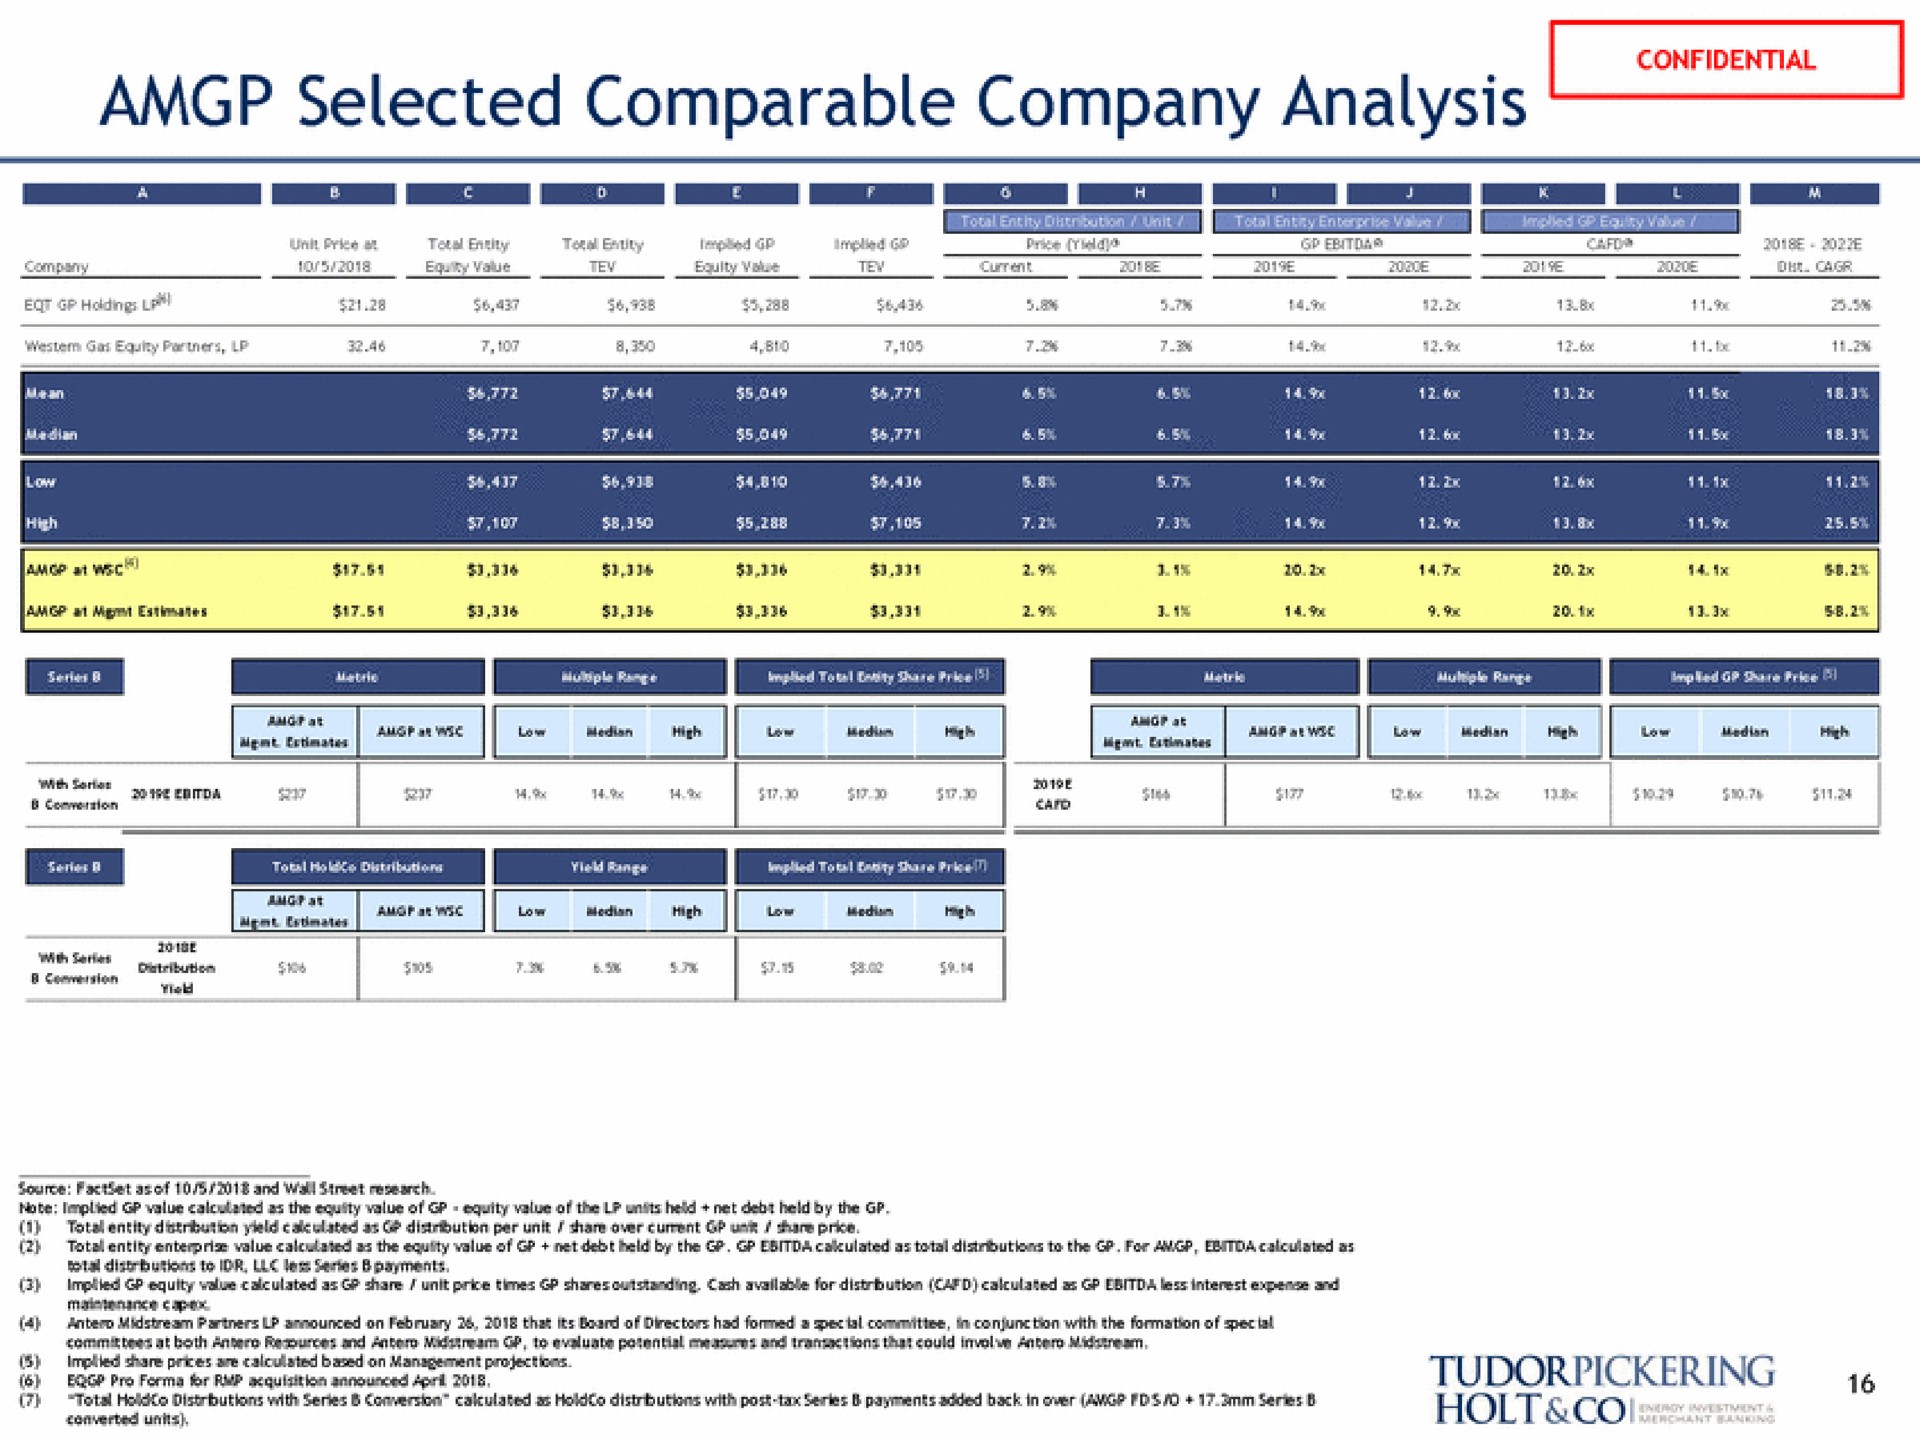 selected comparable company analysis | Tudor, Pickering, Holt & Co